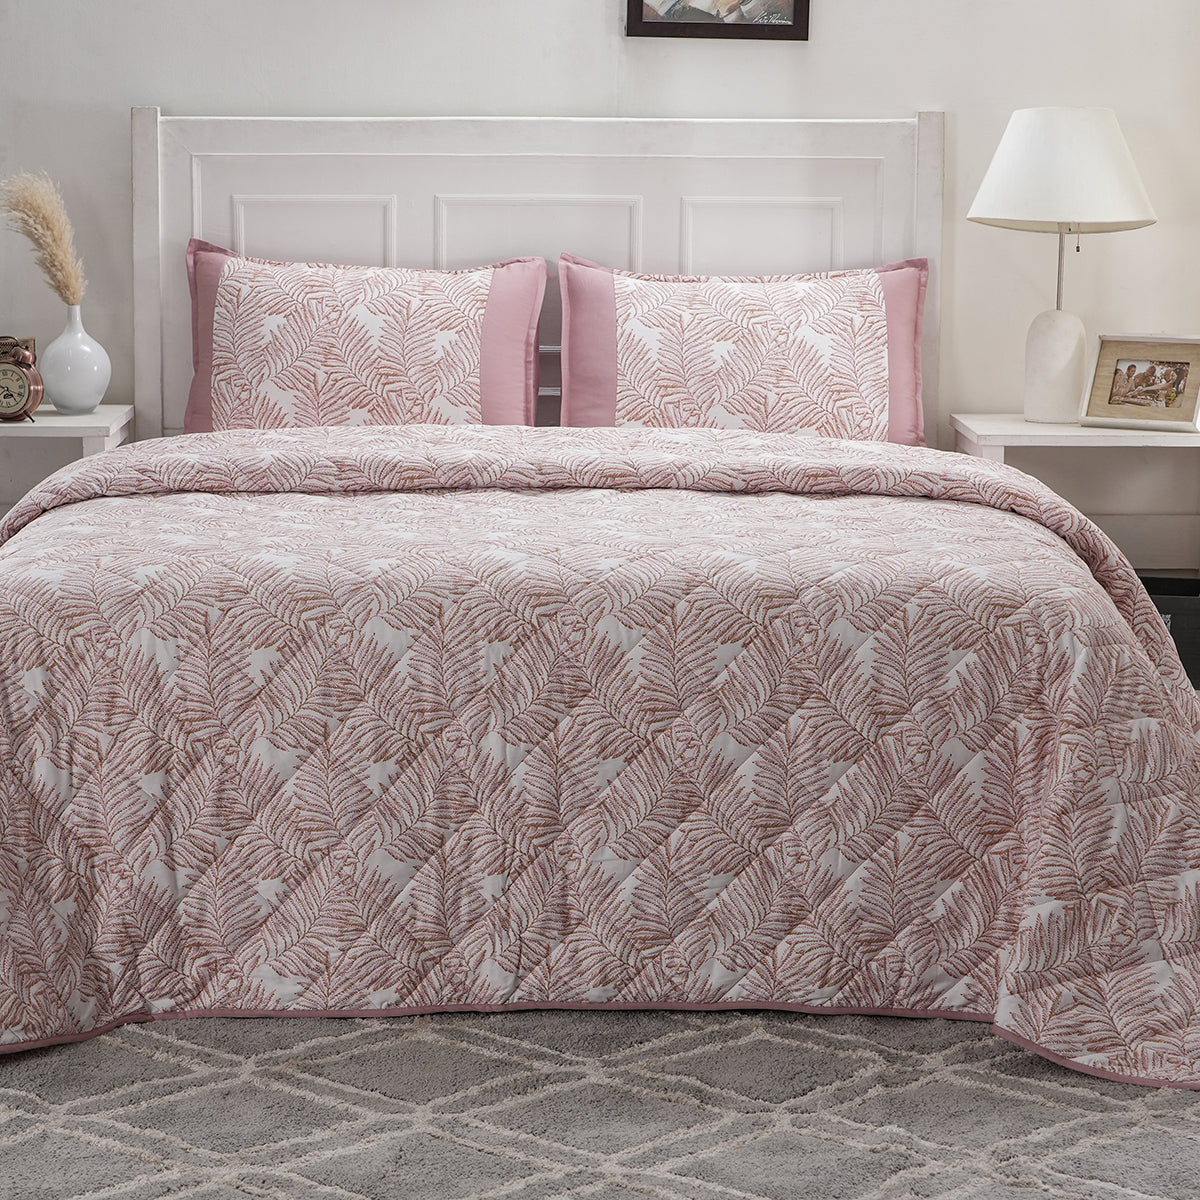 Optimist Bloom Fern 4PC Quilt/Quilted Bed Cover Set